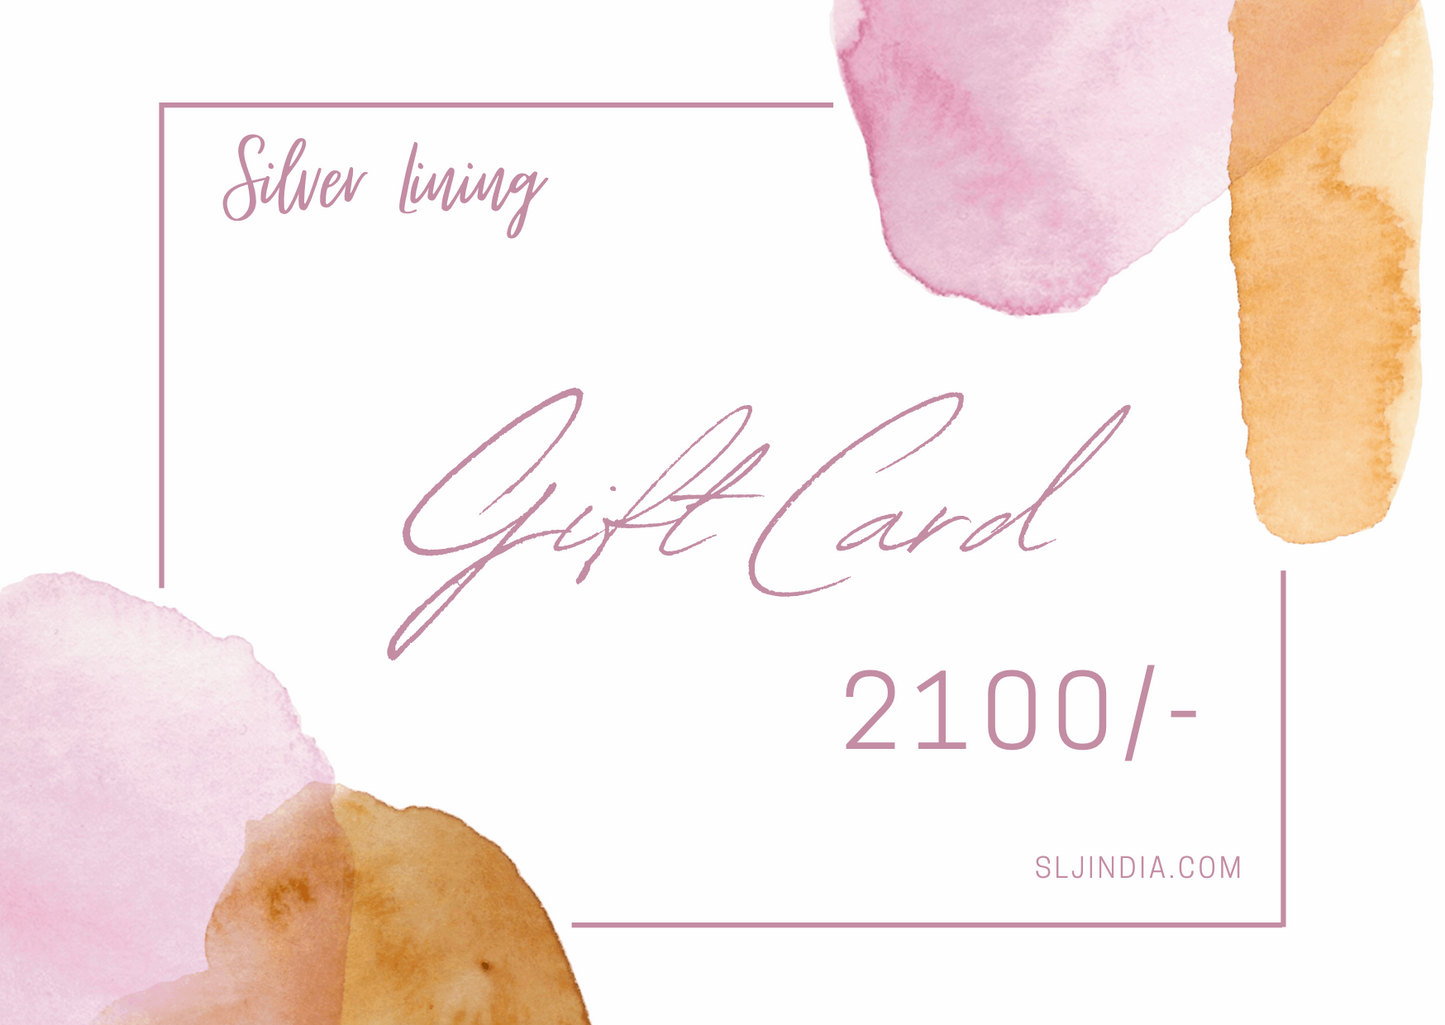 Gift Card - Silver Lining Jewellery